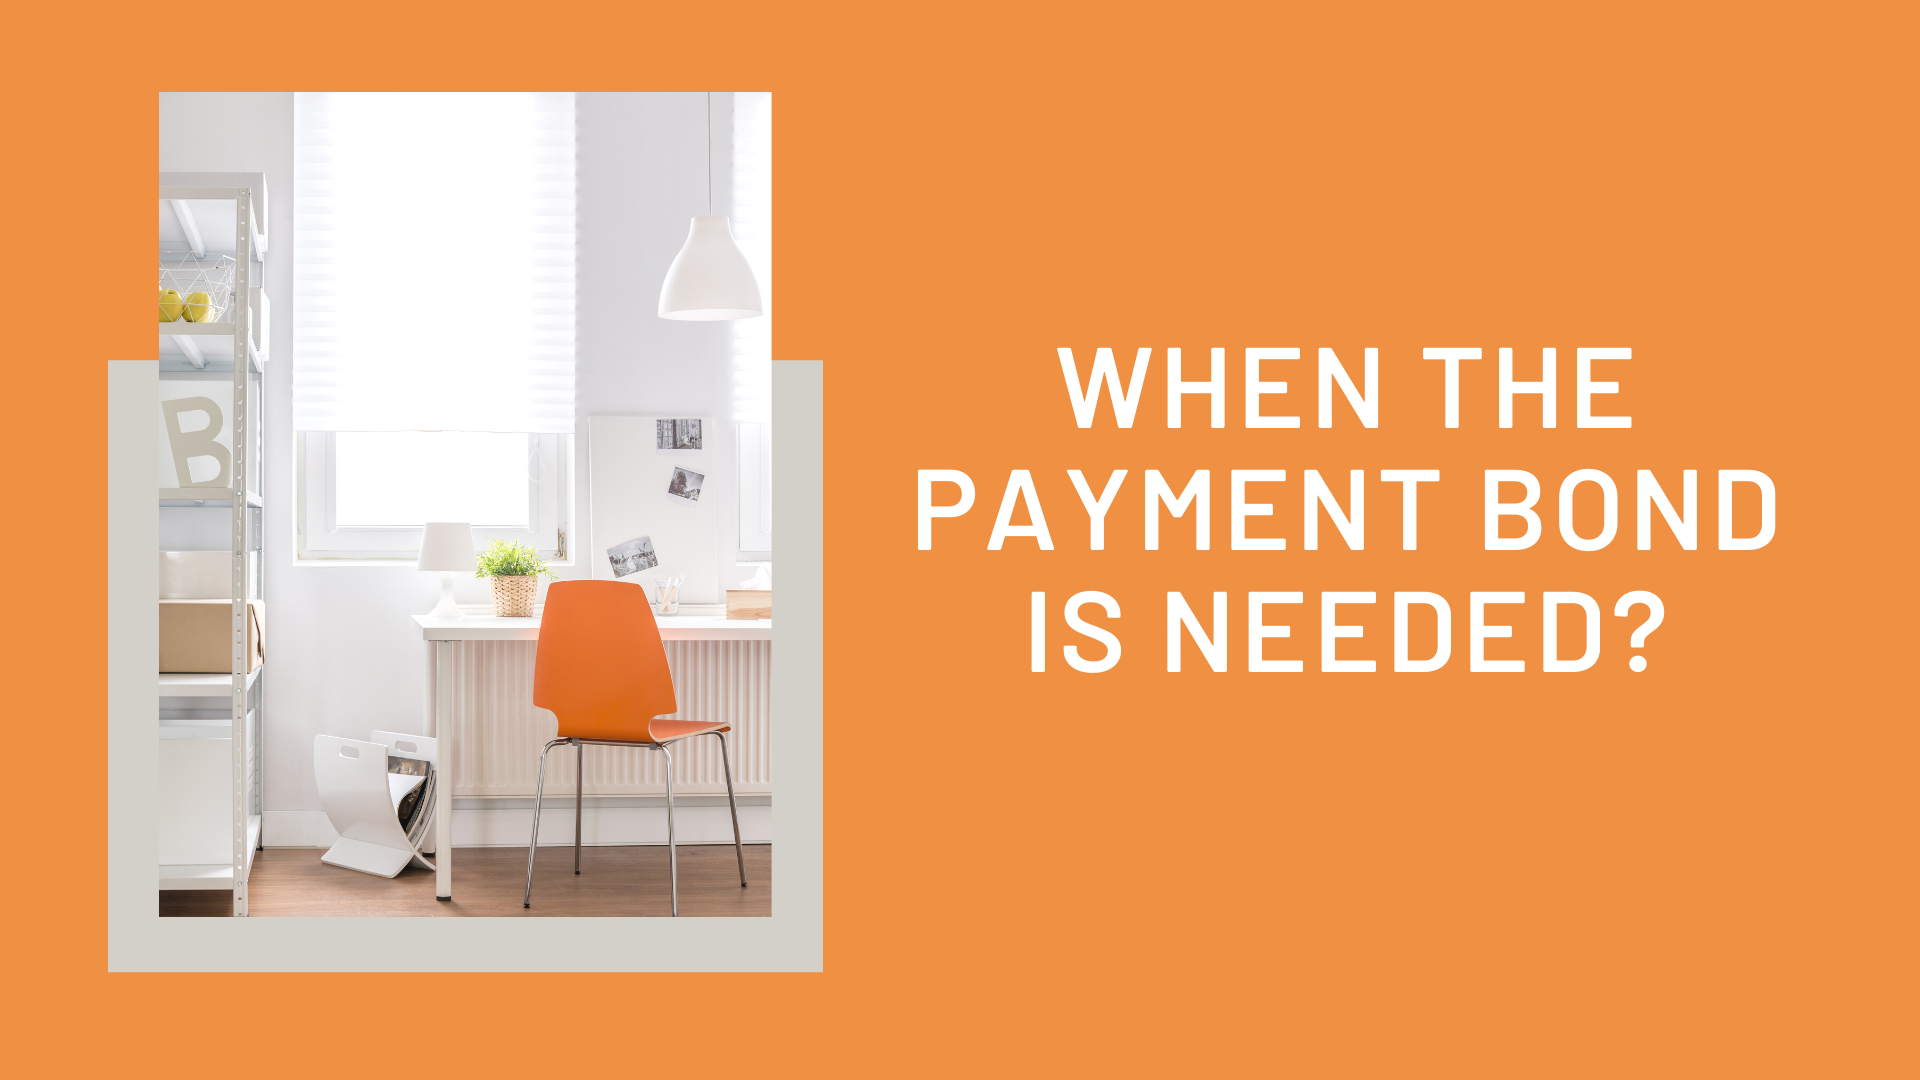 payment bond - When the payment bond is needed? - orange interior